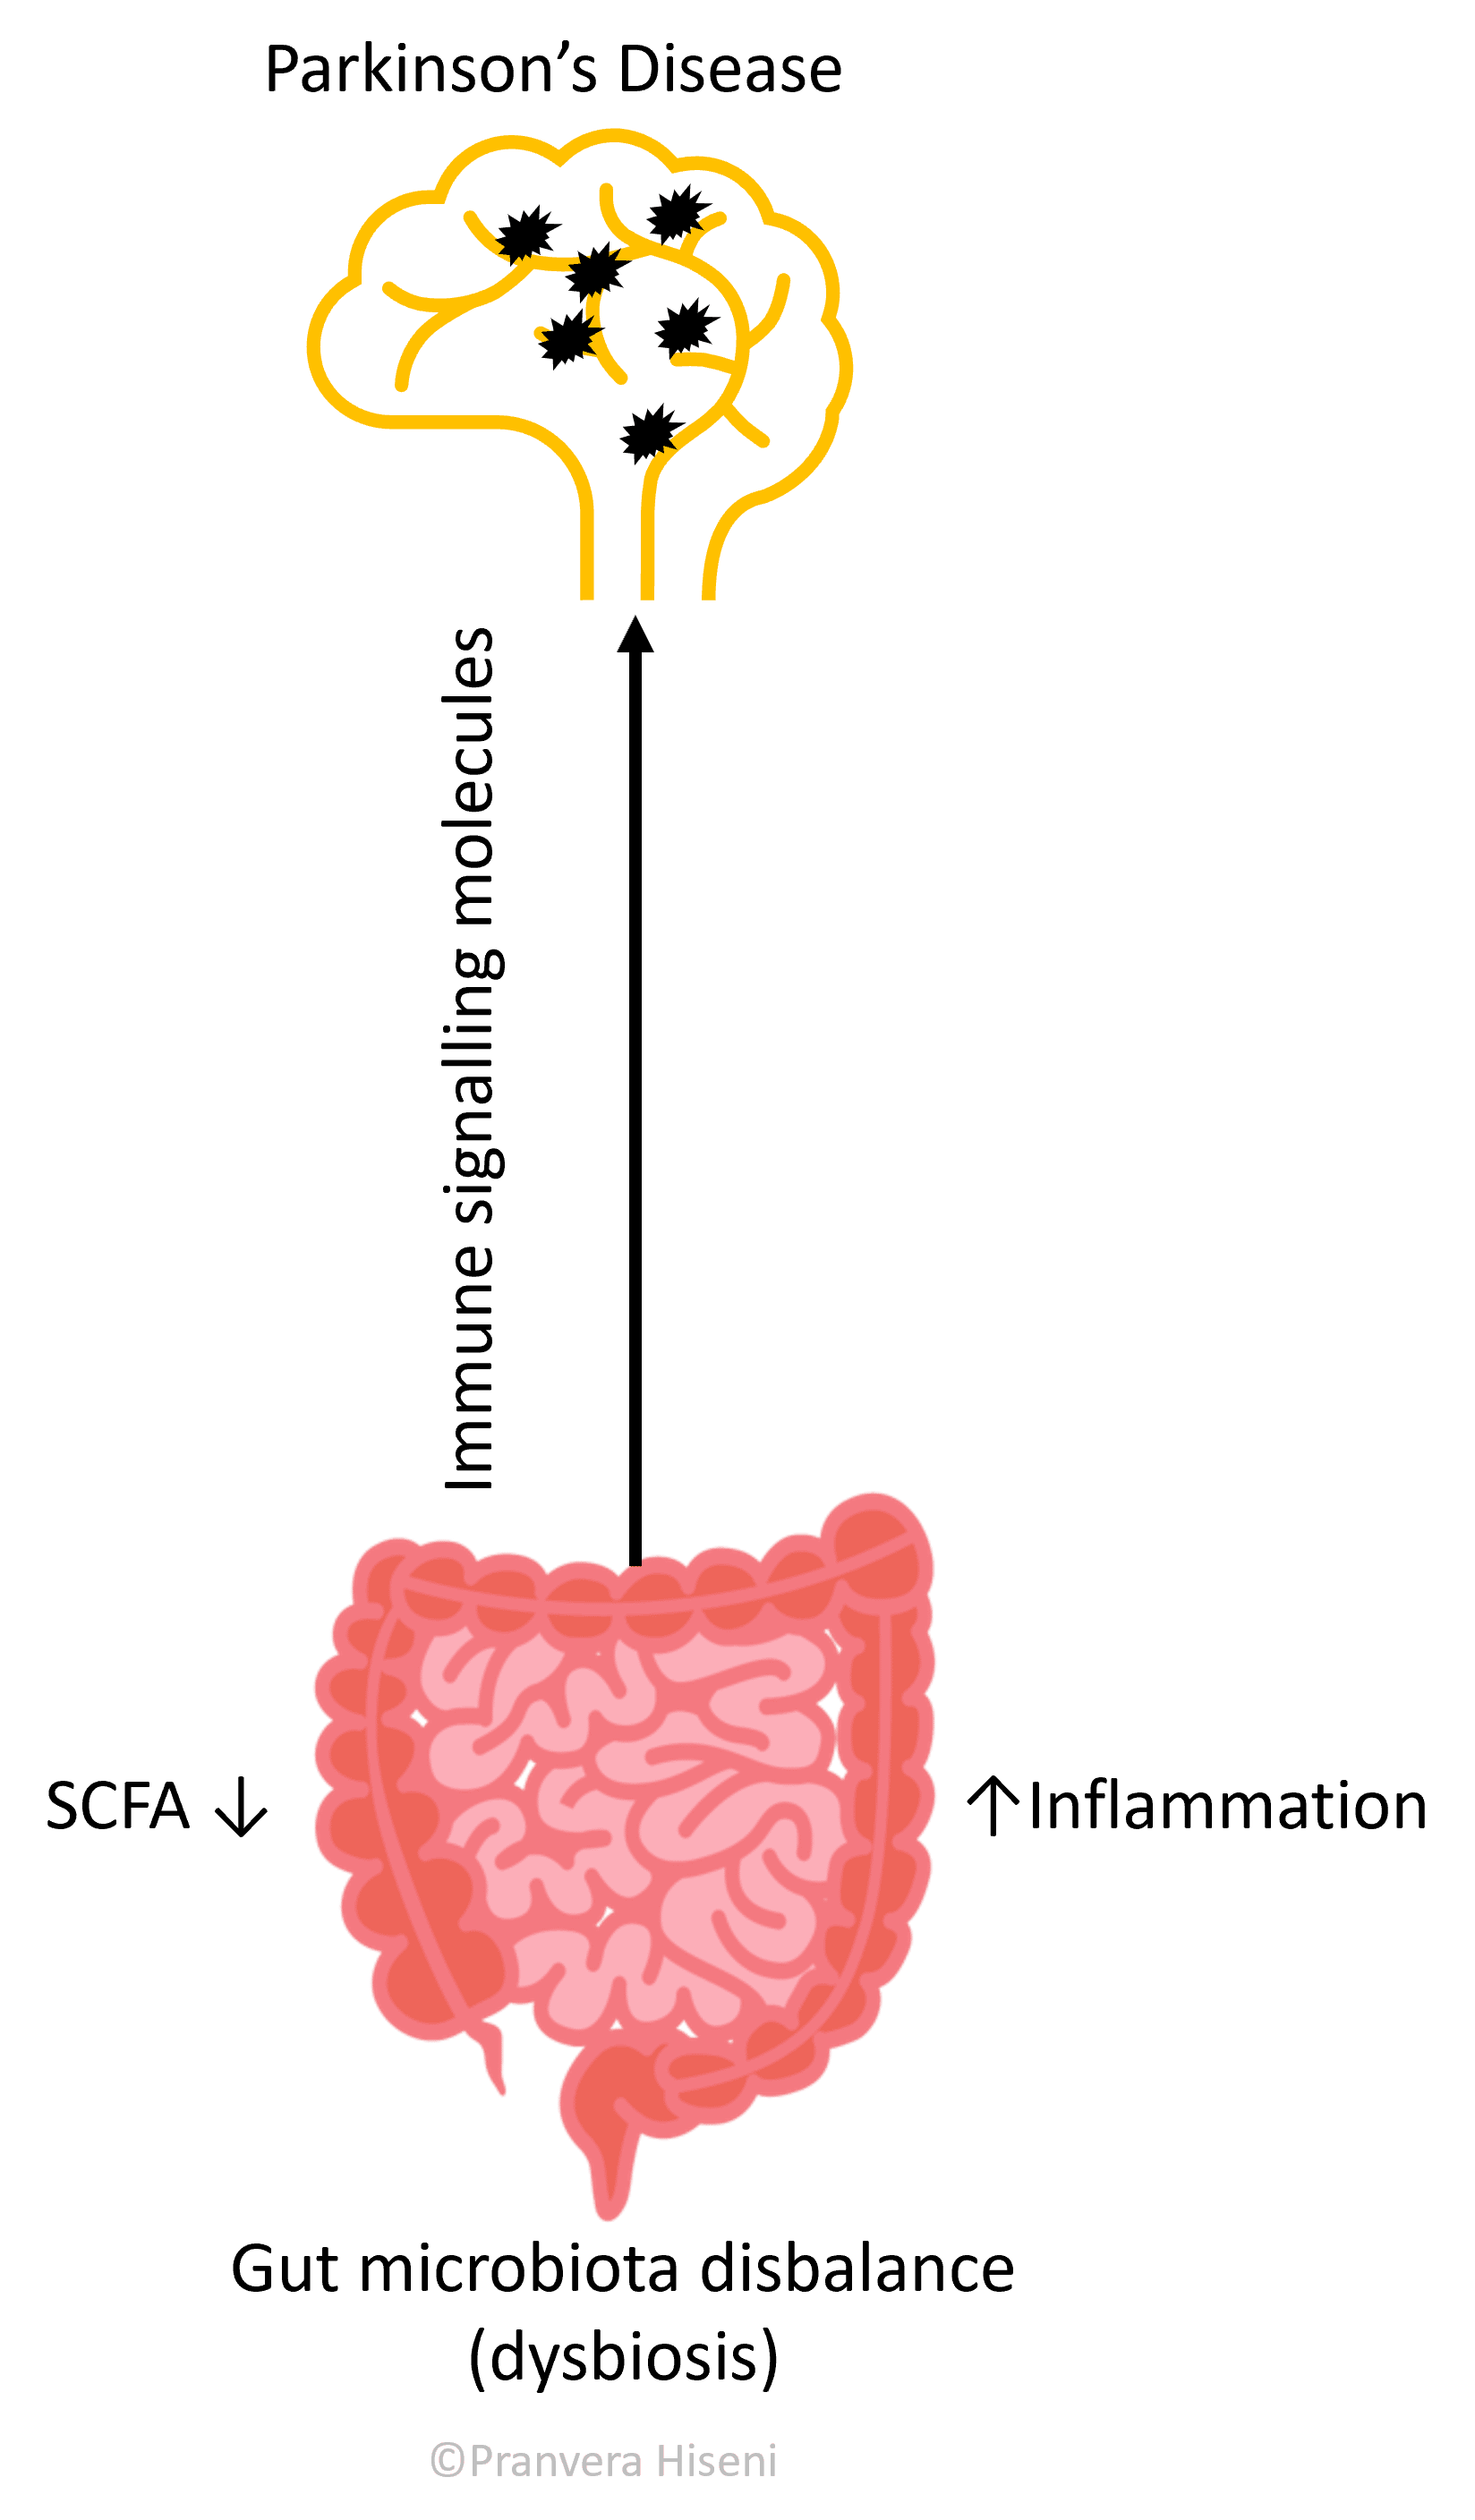 Link between the gut and Parkinson’s Disease illustration.